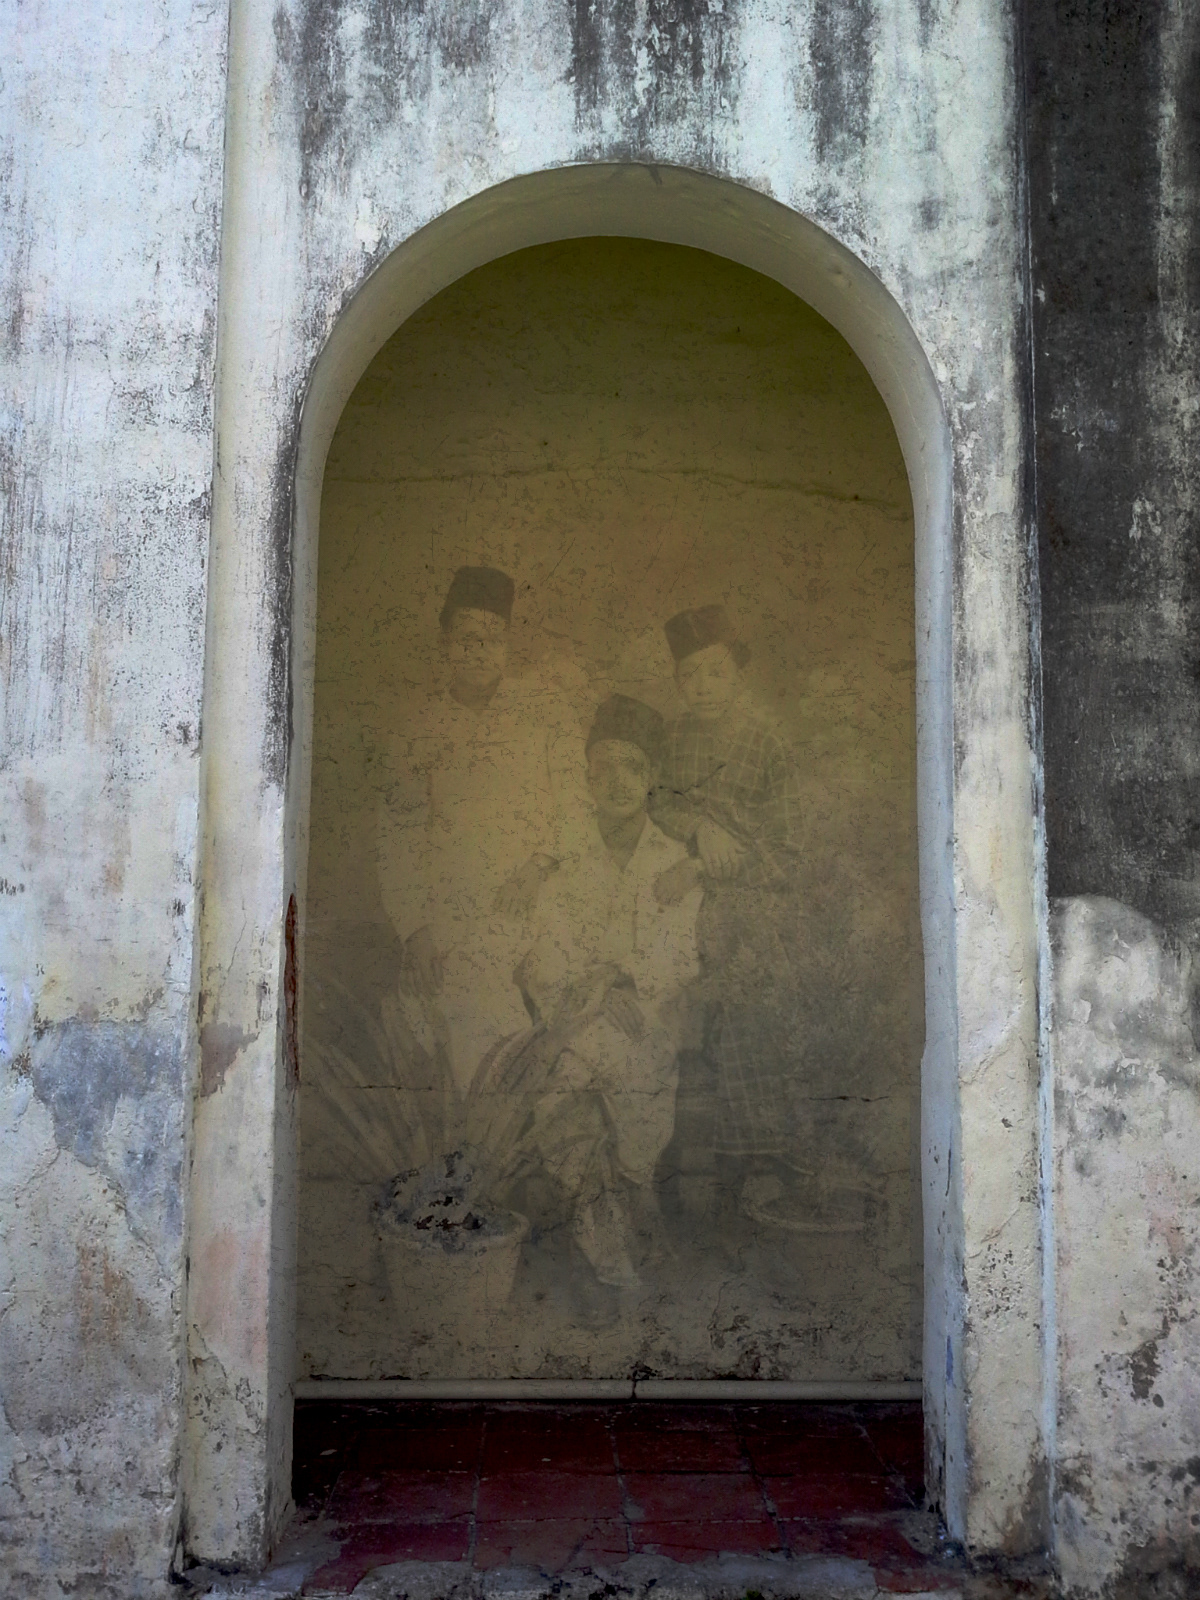 https://www.facebook.com/pages/Hasnul-J-Saidon-Unveiling-The-Warrior/493024417421353?ref=tn_tnmn George Town Penang UNESCO heritage site Virtual street art Hero identity Mural narrative Memory Historical ownership Cultural contestation semiotic ethnicity representation